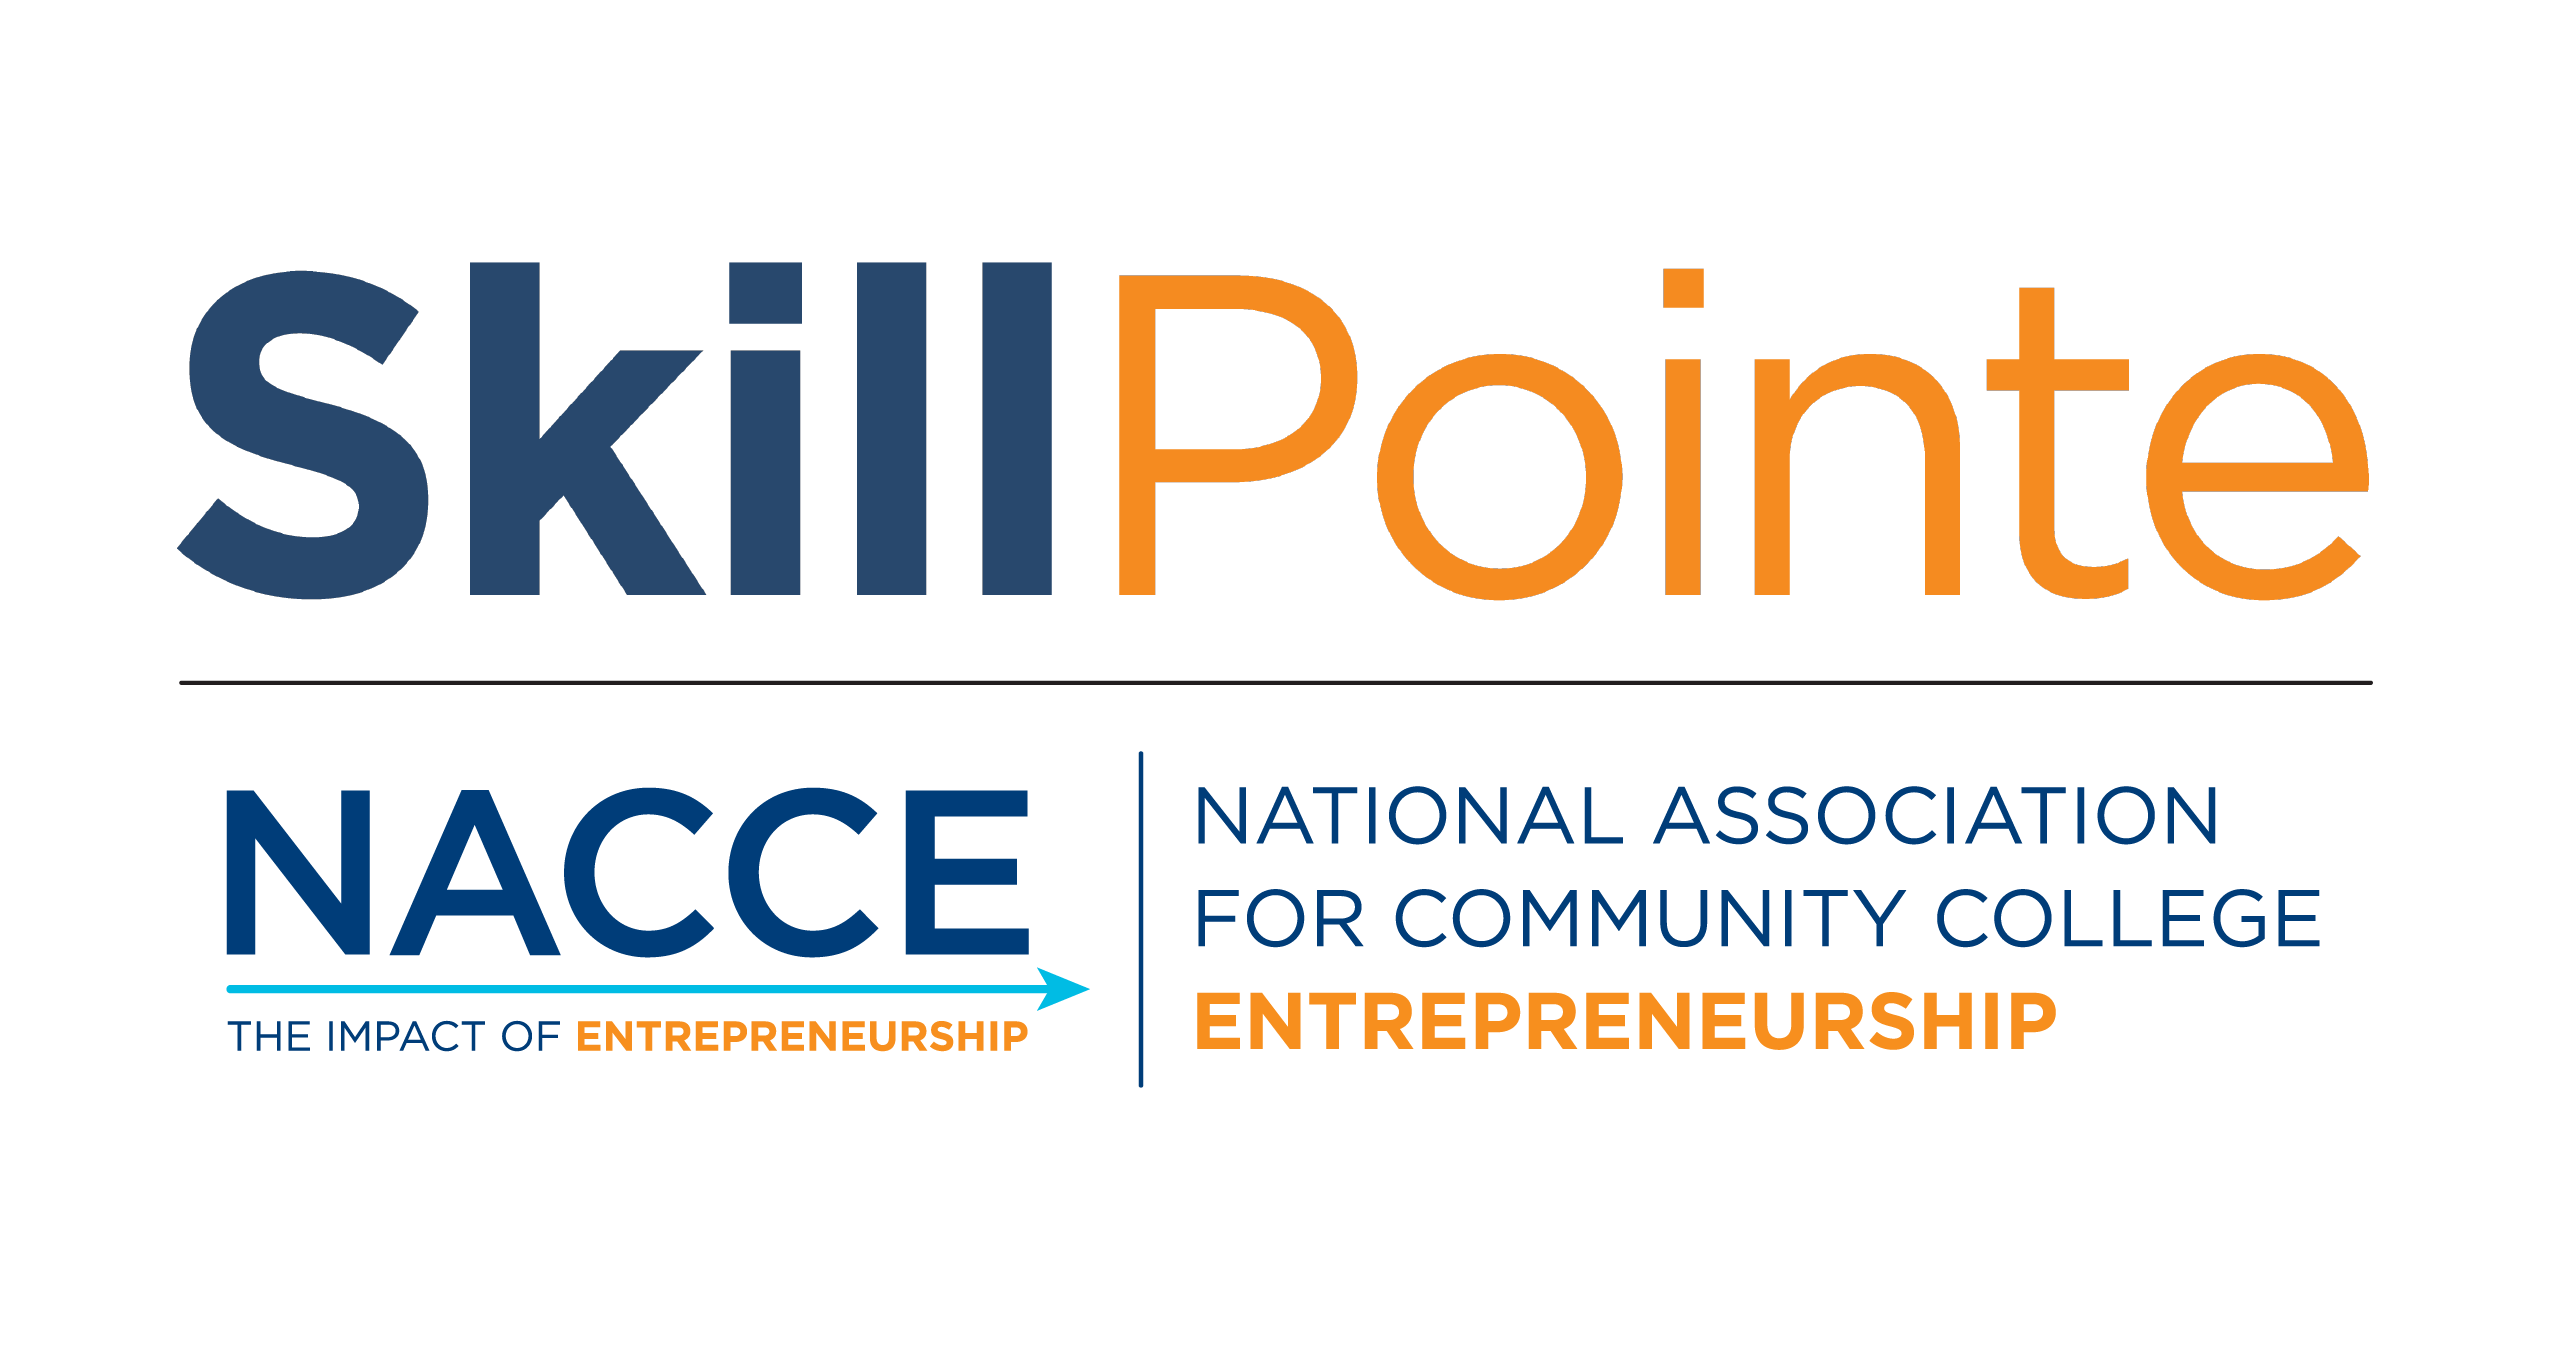 SkillPointe, a nonprofit division of NACCE - National Association for Community College Entrepreneurship